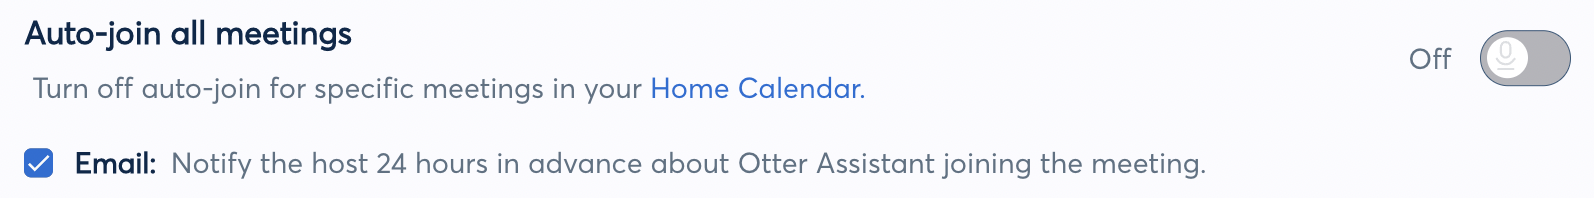 otter_assistant_auto_join_off.png